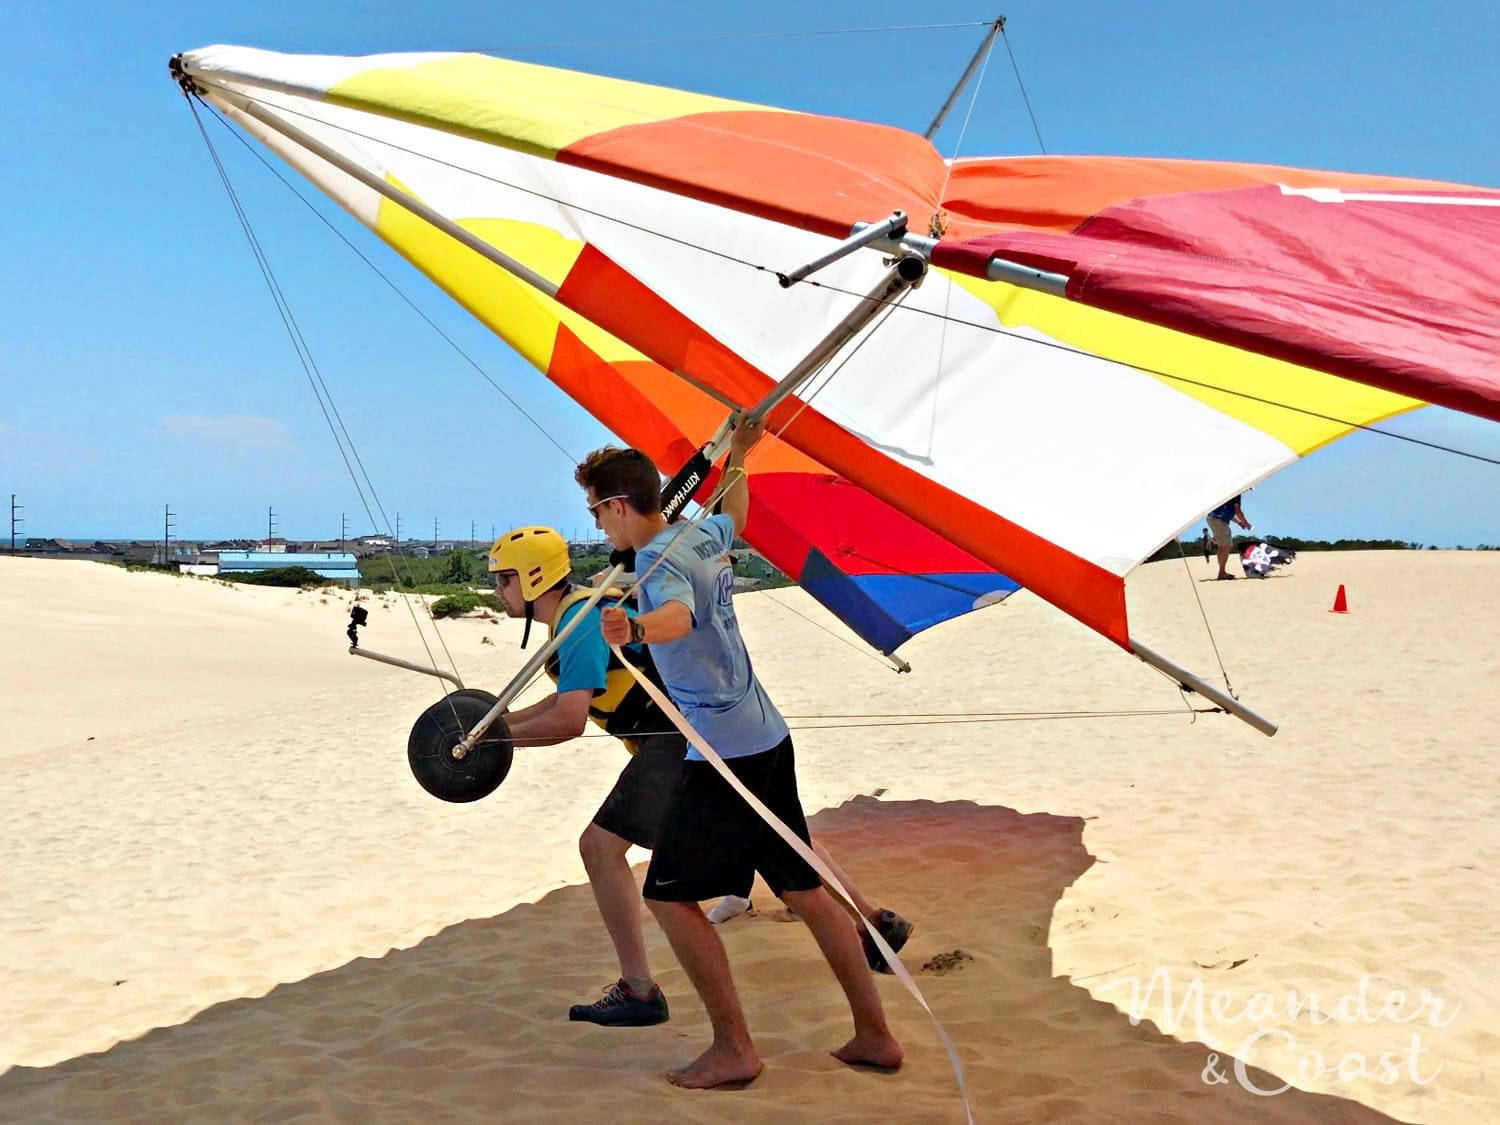 Dune Hang Gliding Coach Practice Background